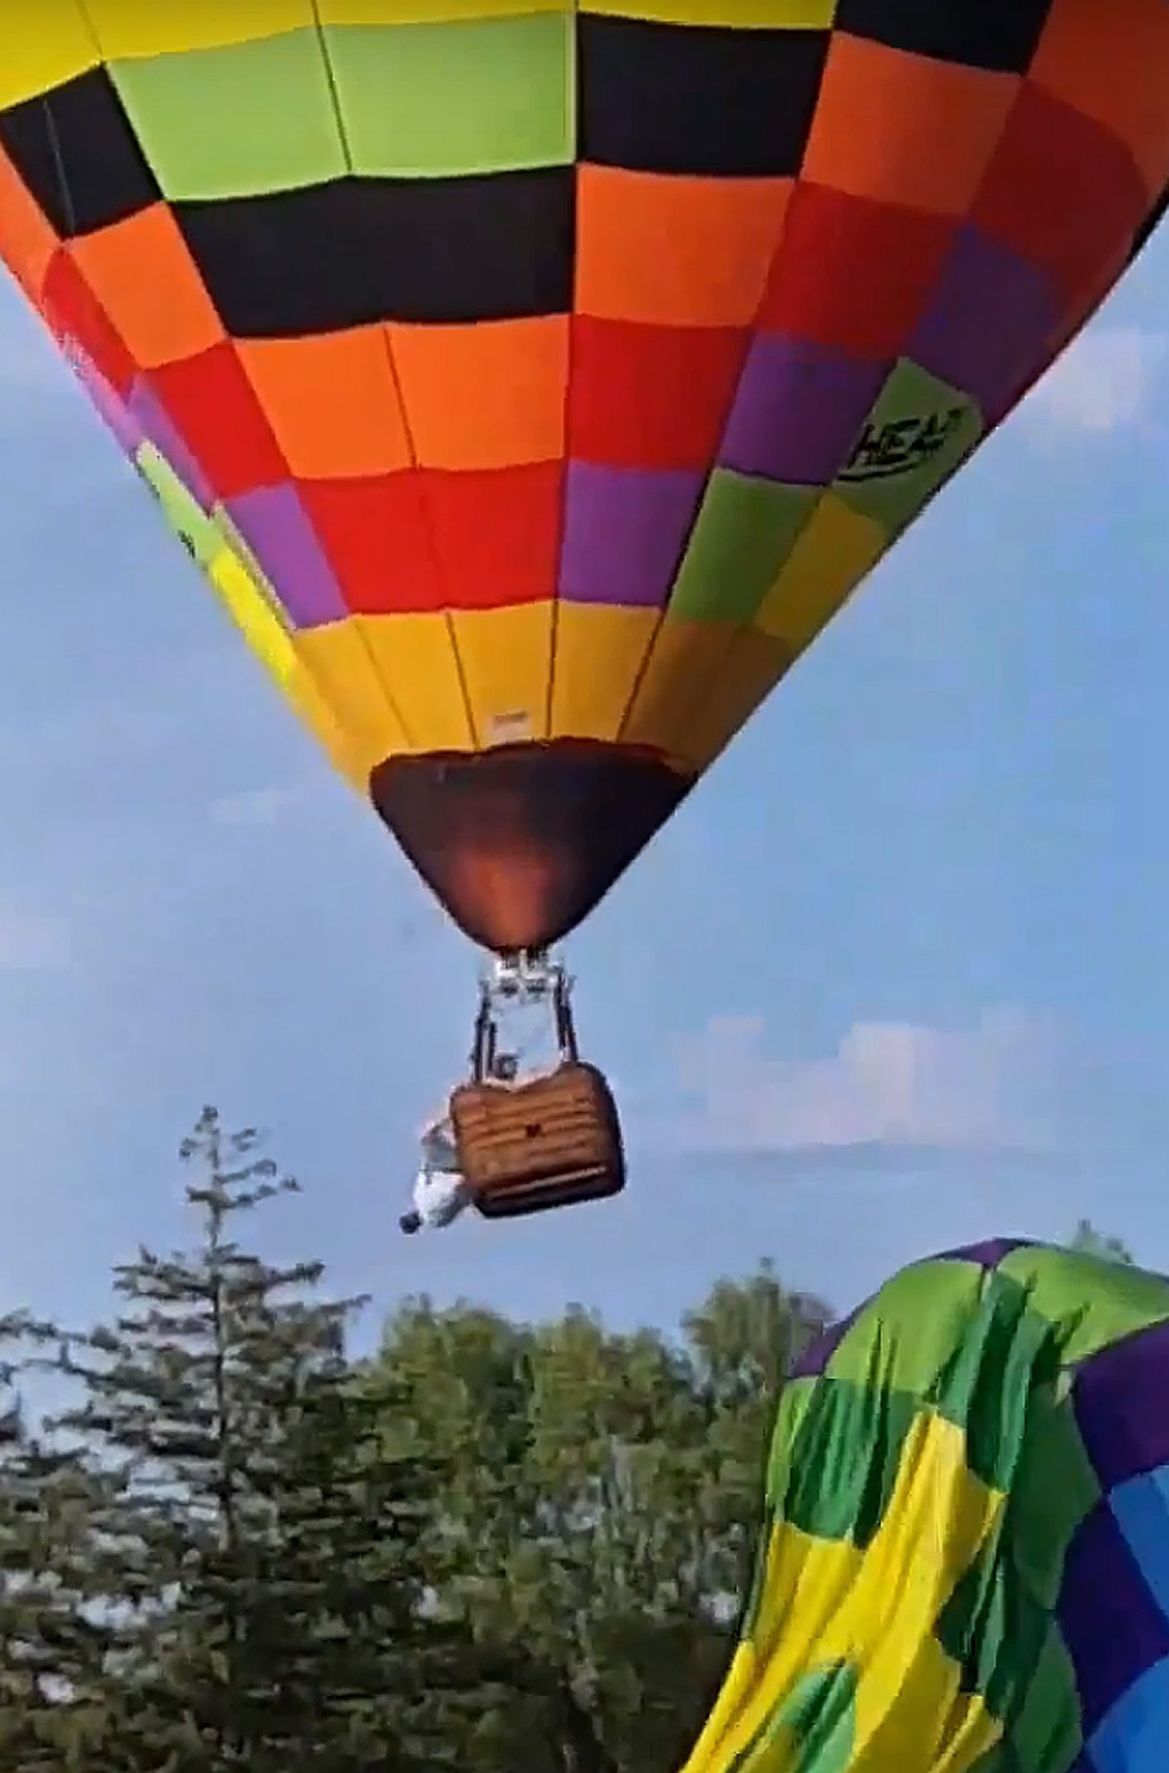 Pilot falls from hot-air balloon during Chatsworth event | Local ...